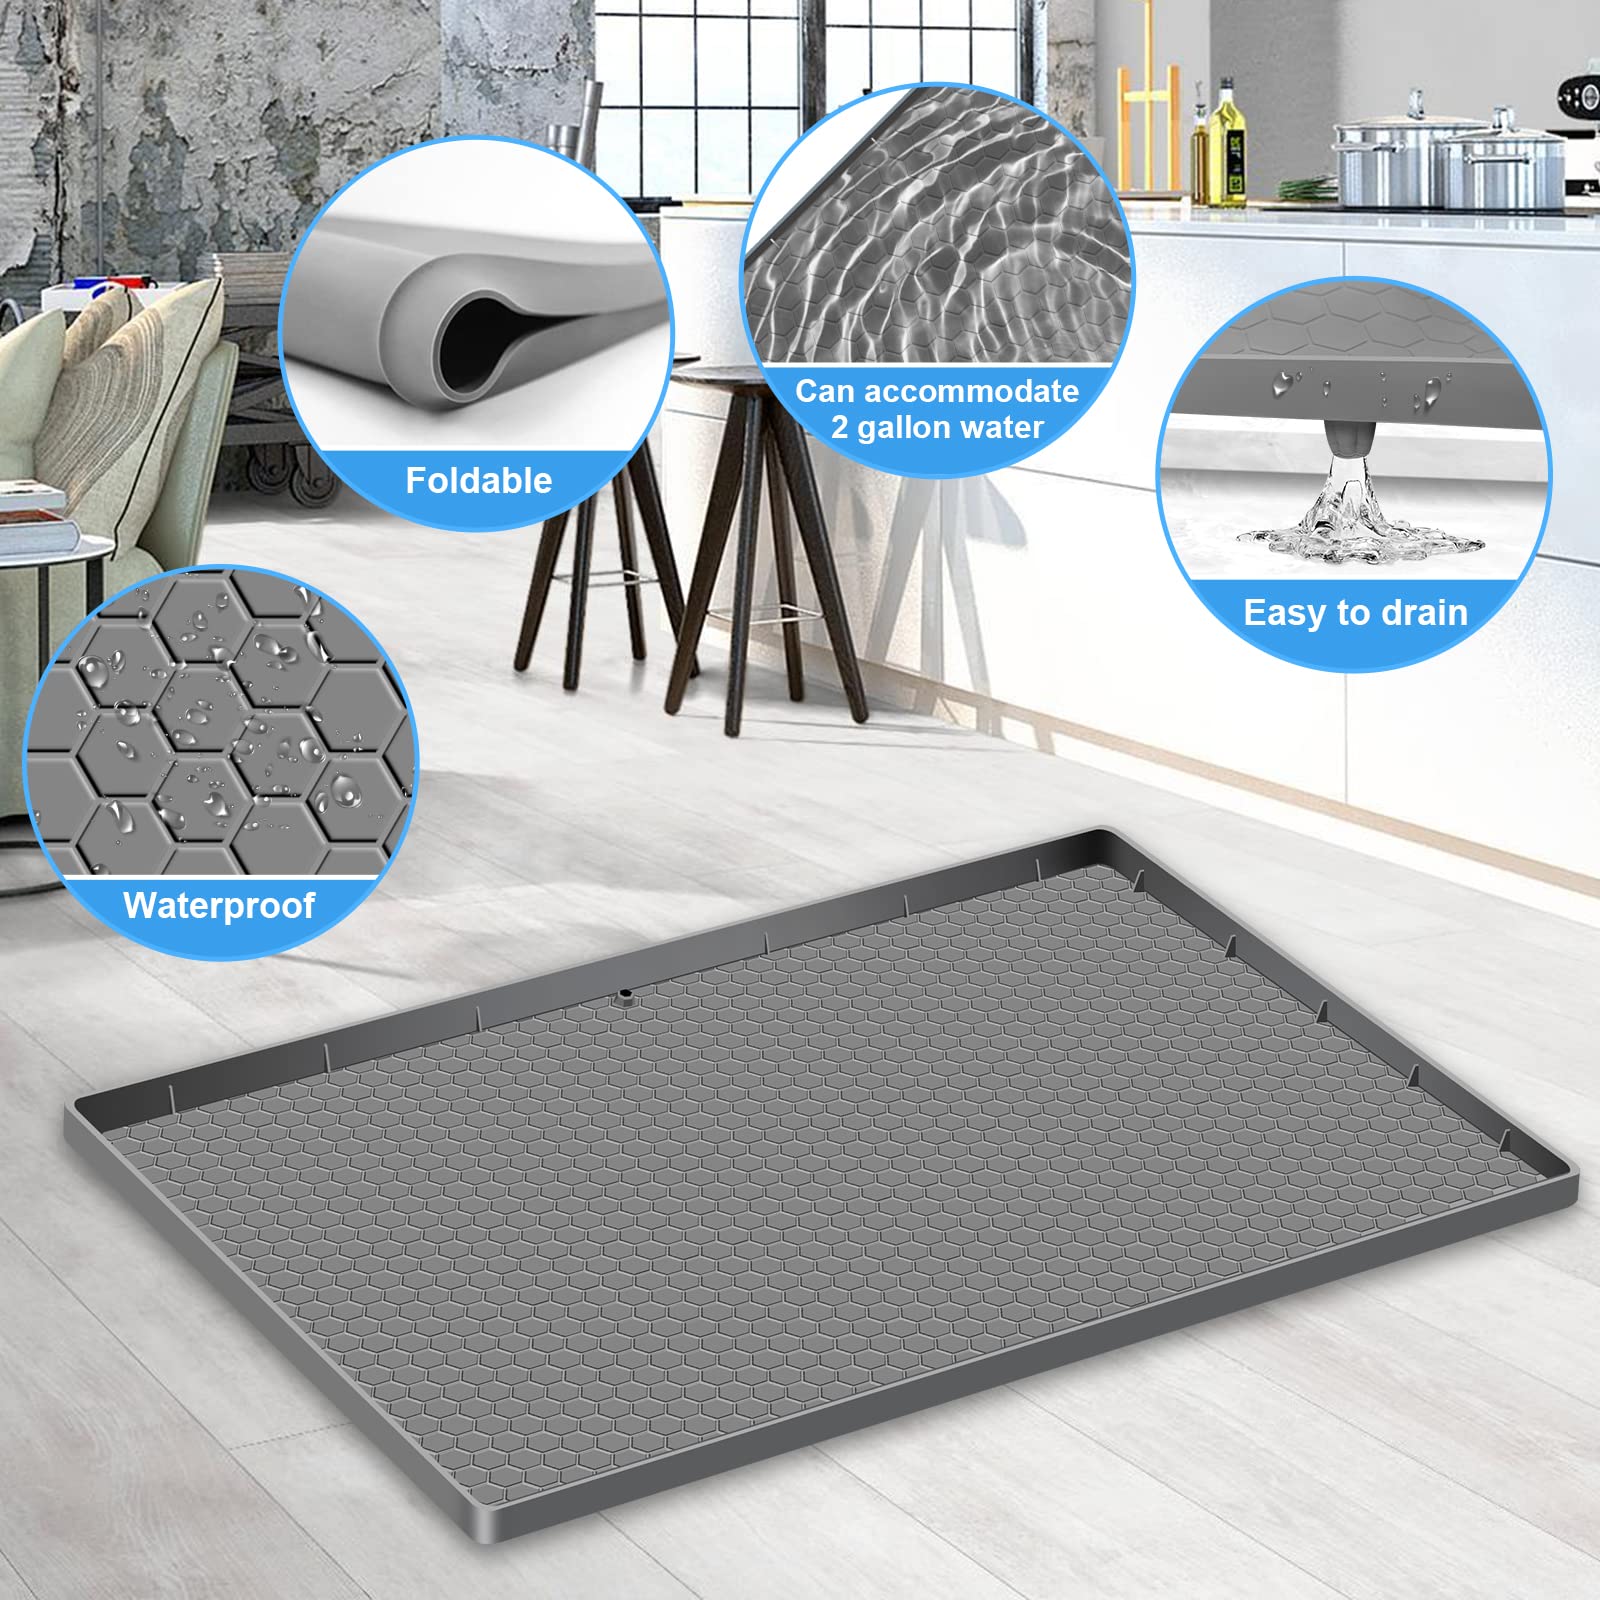 Under Sink Mat, 34"*22"*0.67", Waterproof, Cabinet Protector Silicone Mats for Kitchen & Bathroom, Holds up to 2 Gallon Liquiq(Dark Gray) (Thin860g)